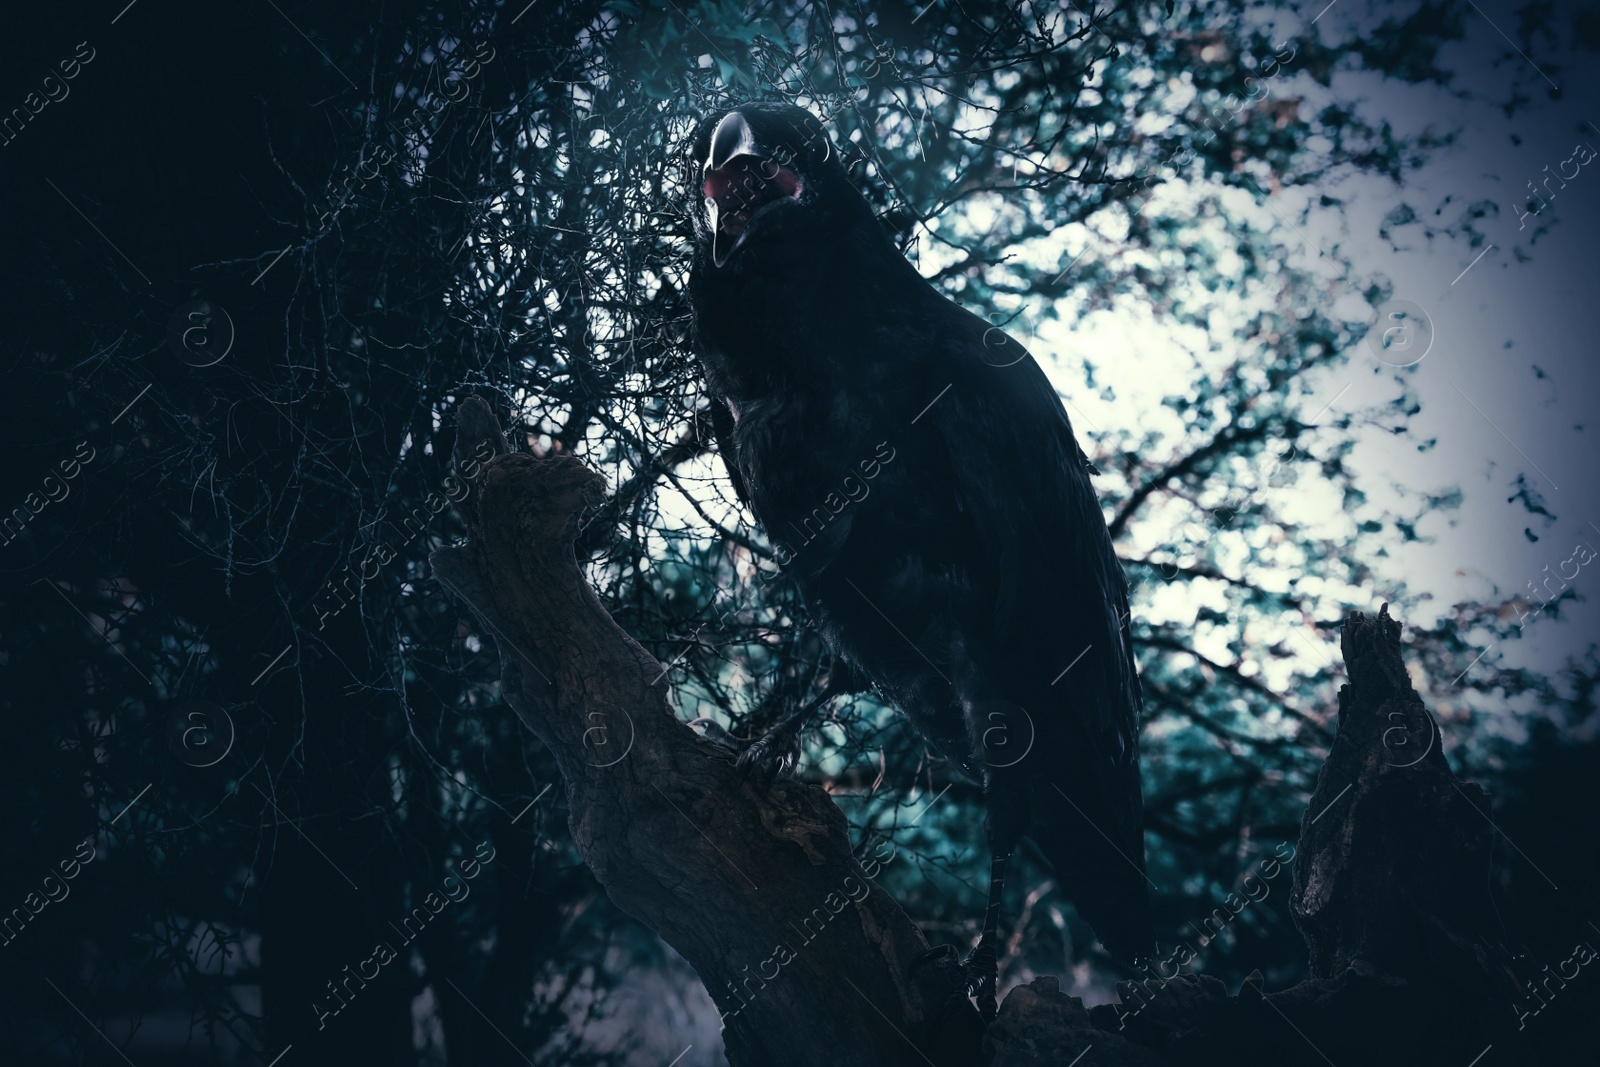 Image of Black crow croaking in creepy forest. Fantasy world